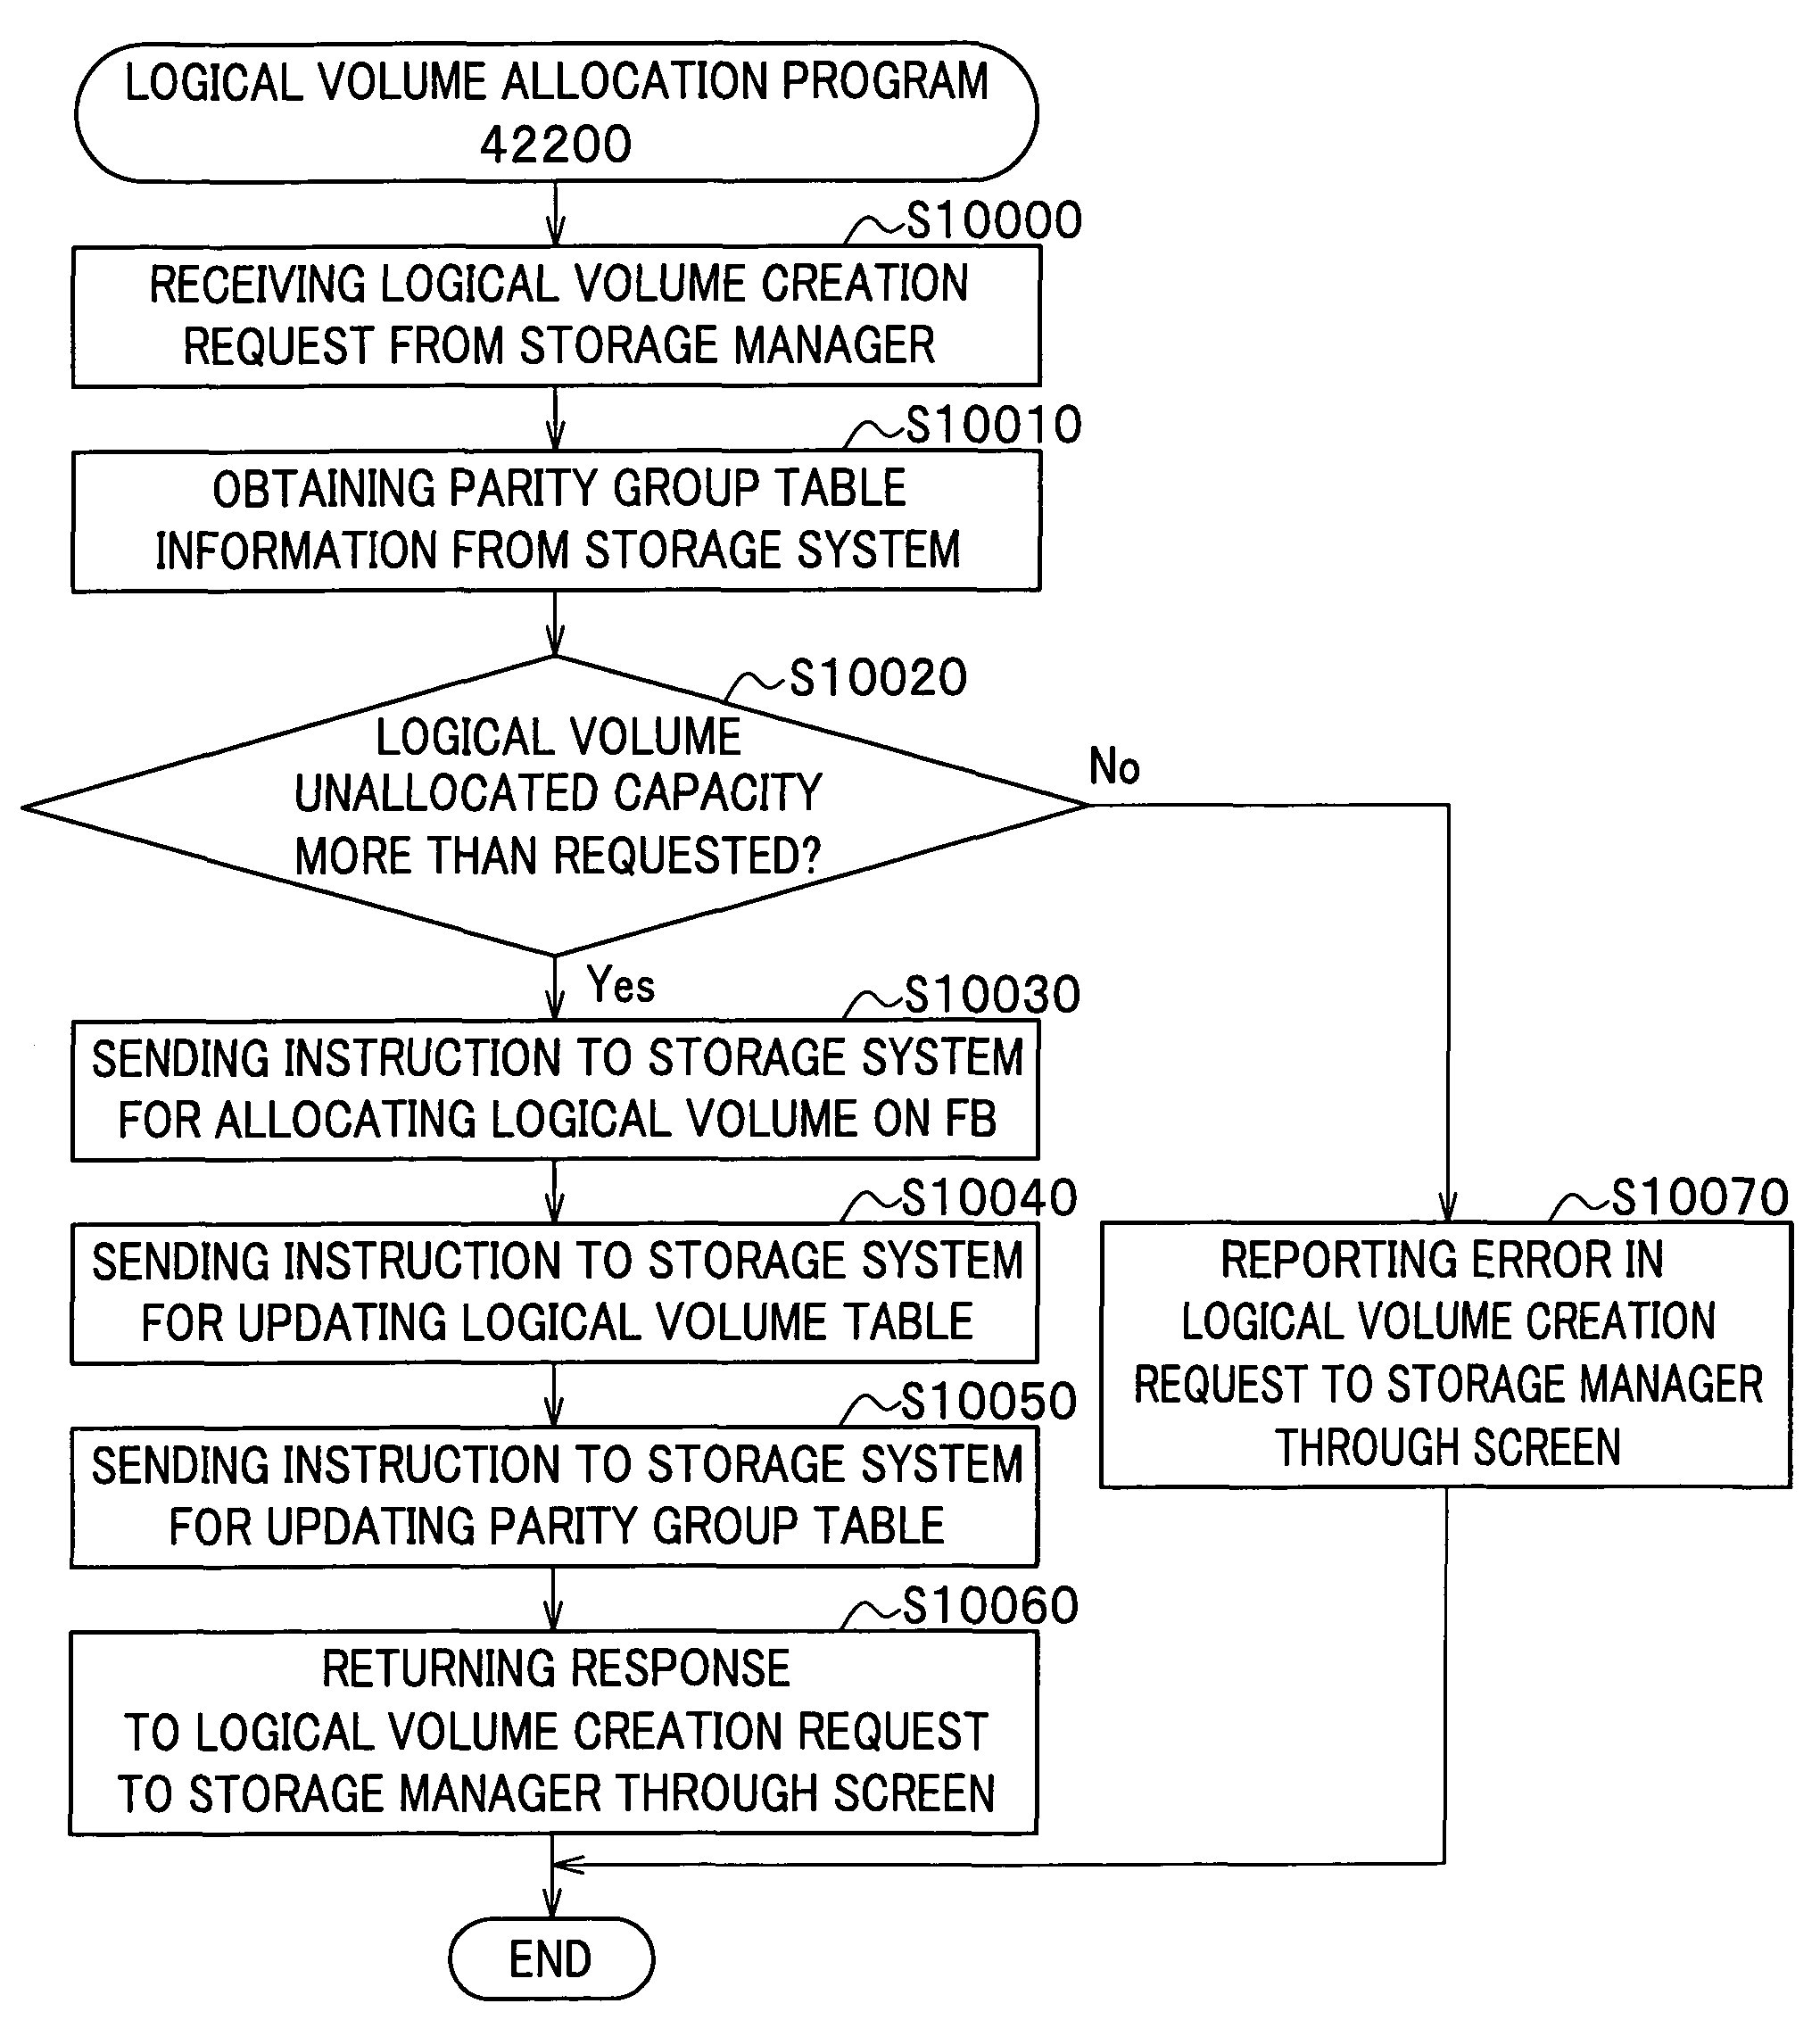 Allocation of logical volumes to flash memory drives